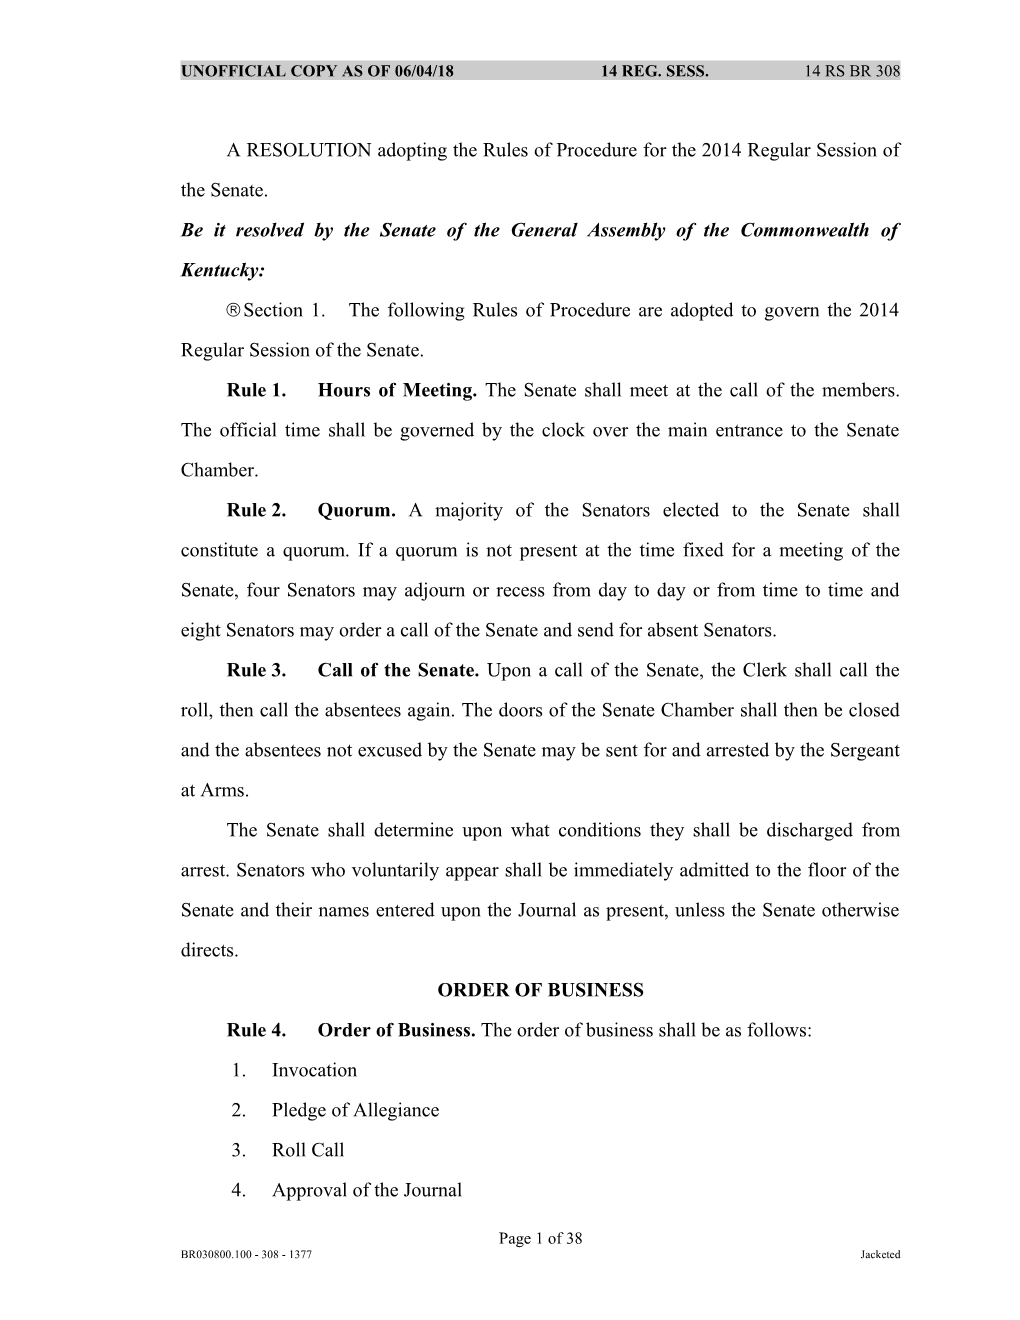 A RESOLUTION Adopting the Rules of Procedure for the 2014 Regular Session of the Senate